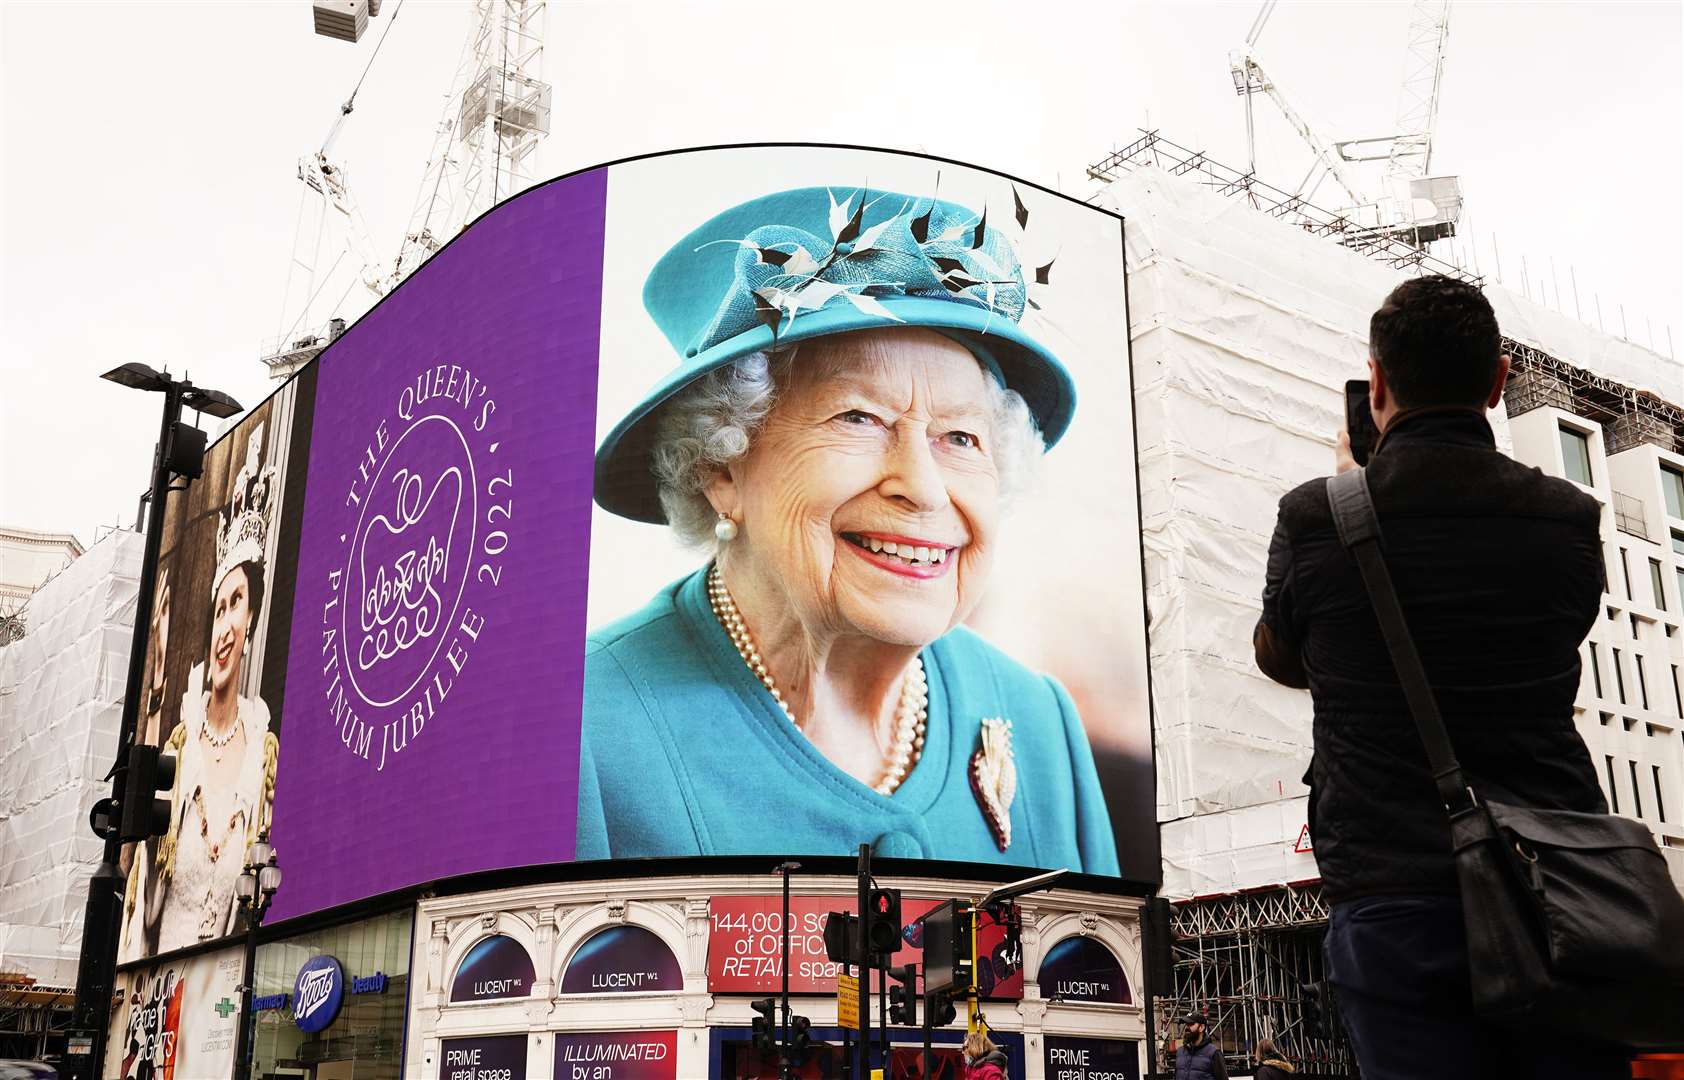 The logo has also been displayed on the lights in London’s Piccadilly Circus (PA)